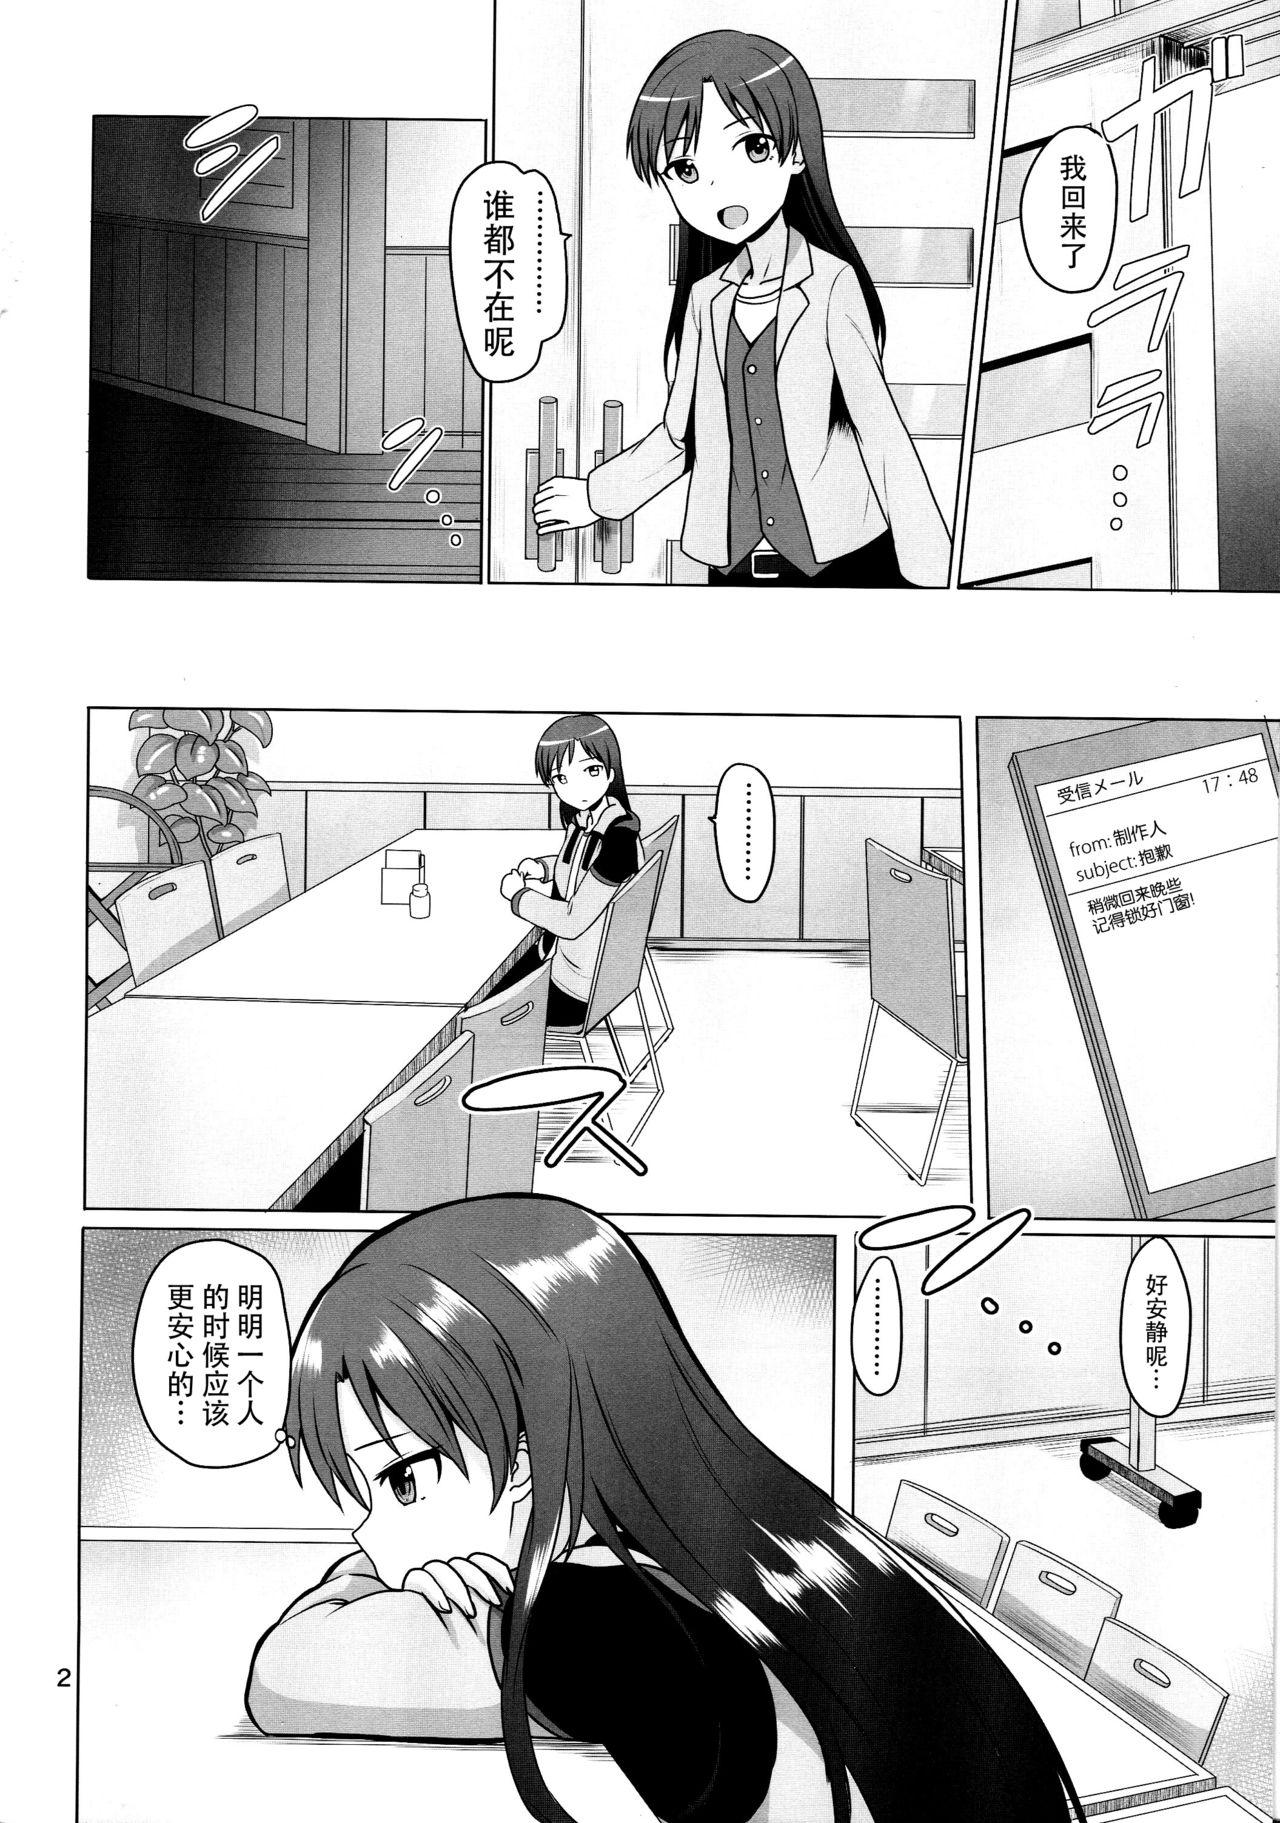 Small Futari no Ie - The idolmaster Soapy - Page 4